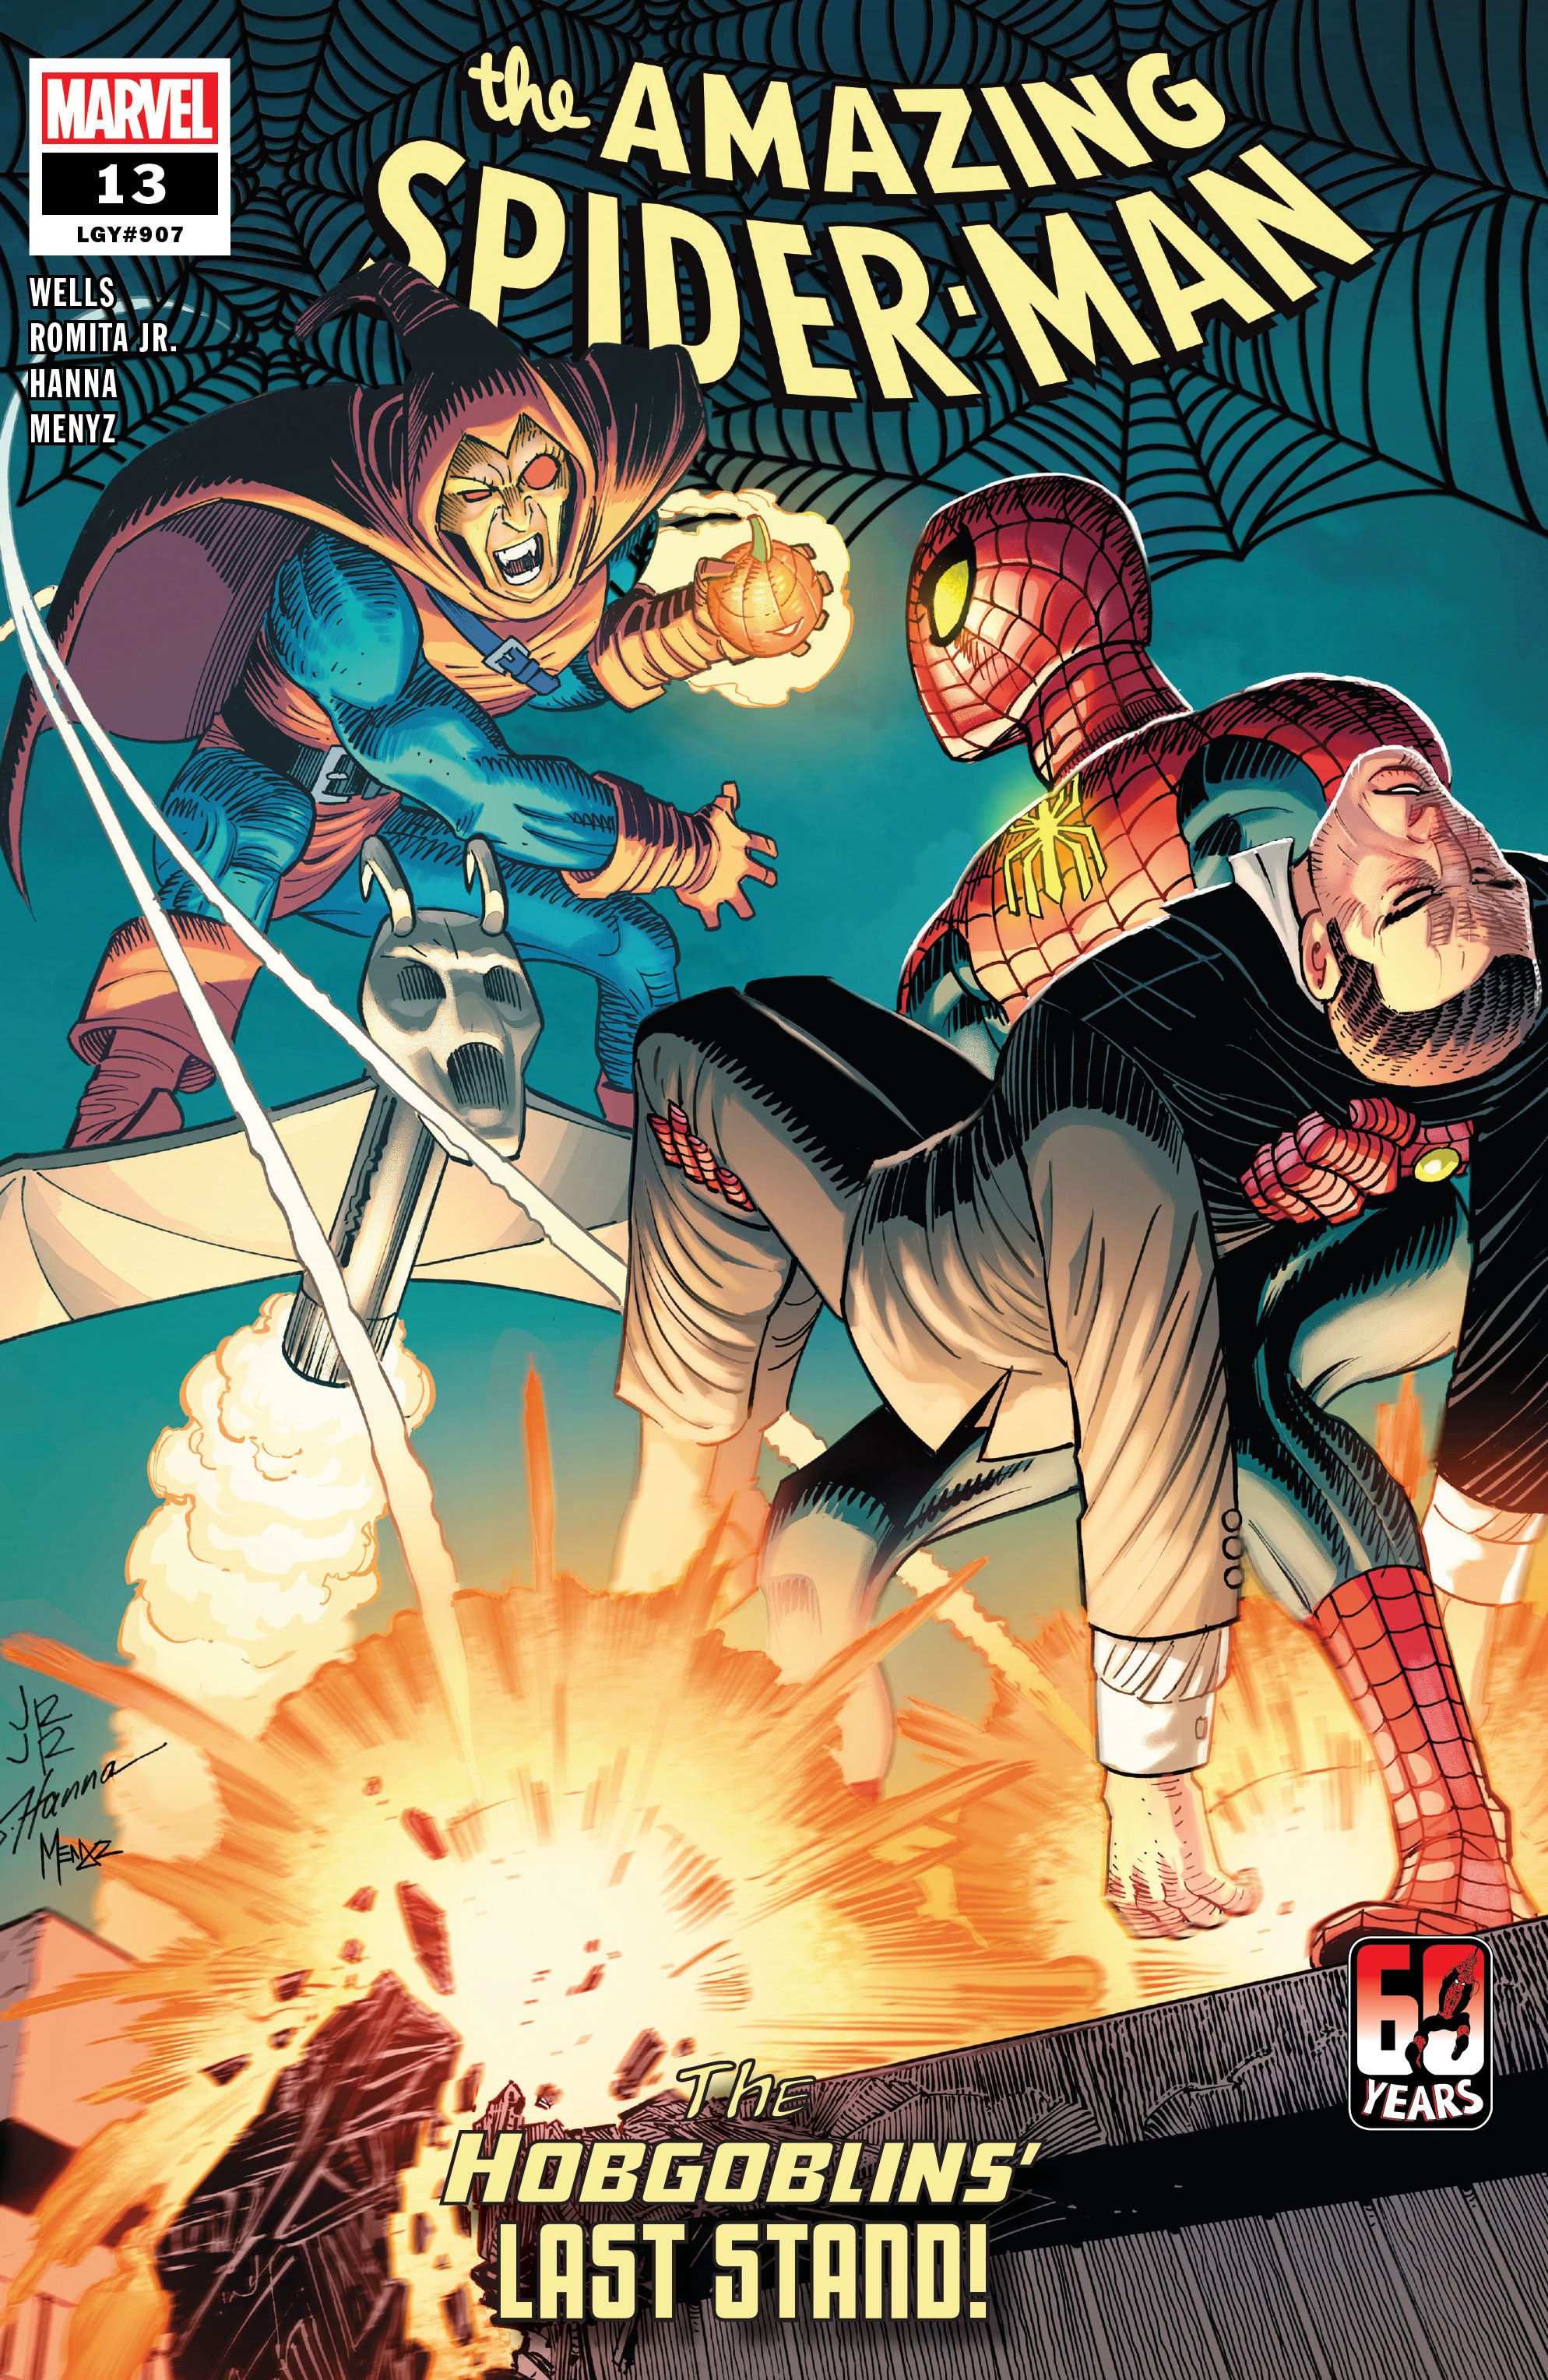 A New Hero Saves Peter Parker in Marvel's Amazing Spider-Man #13